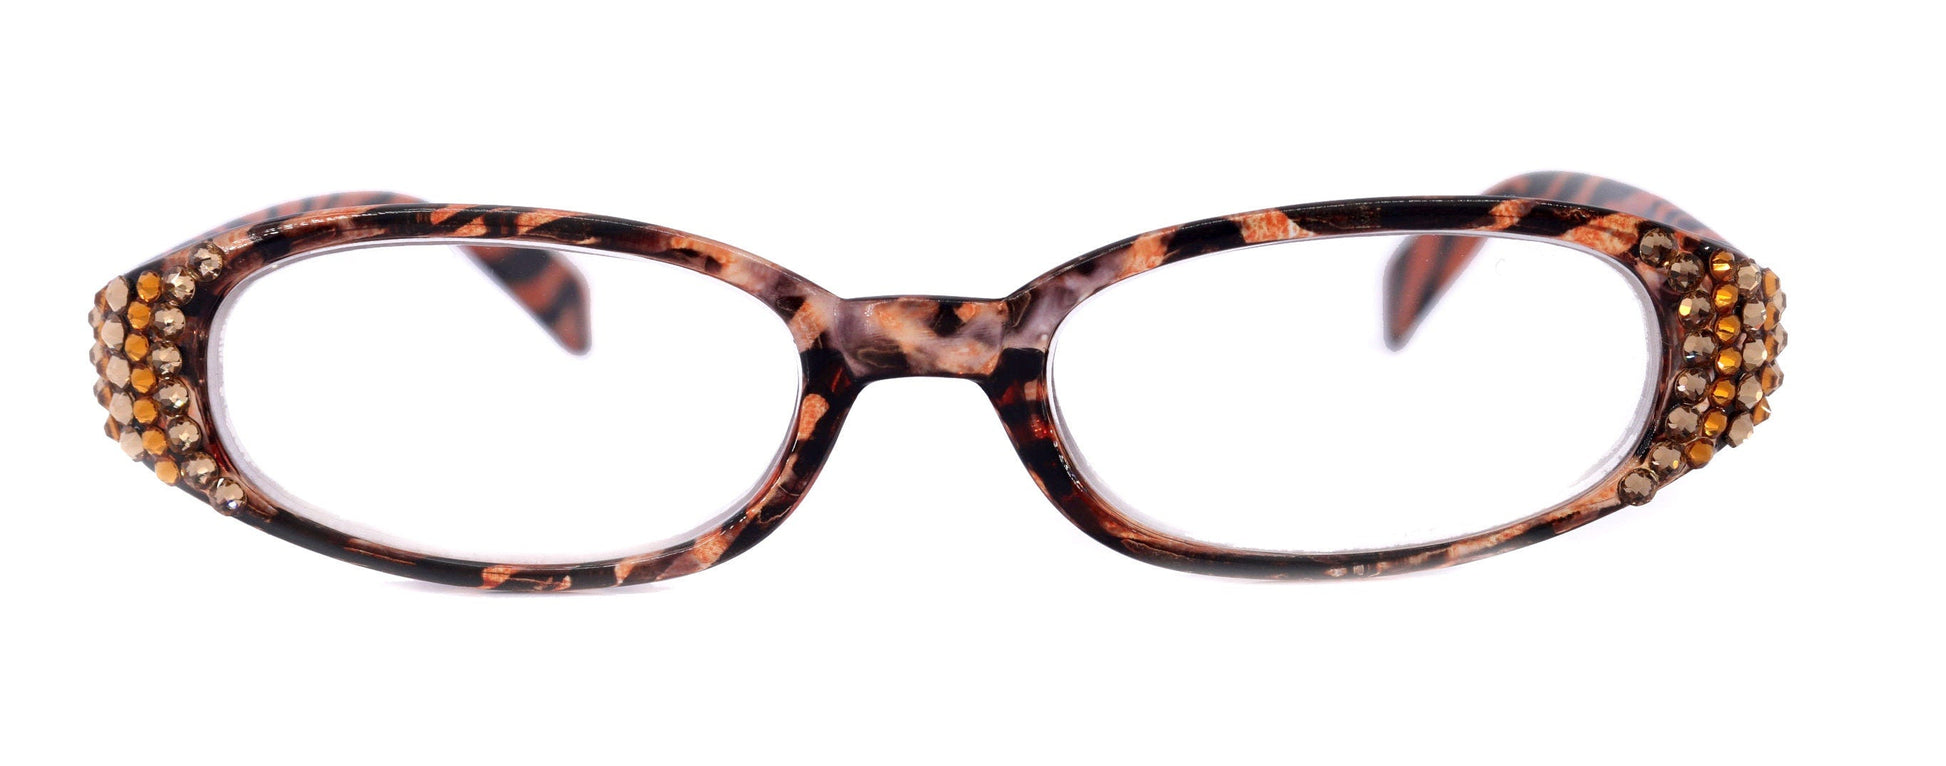 Isabella, (Bling) Reading Glasses Women W (Cooper, Light Colorado) Genuine European Crystals (Tiger) Animal Print NY Fifth Avenue 